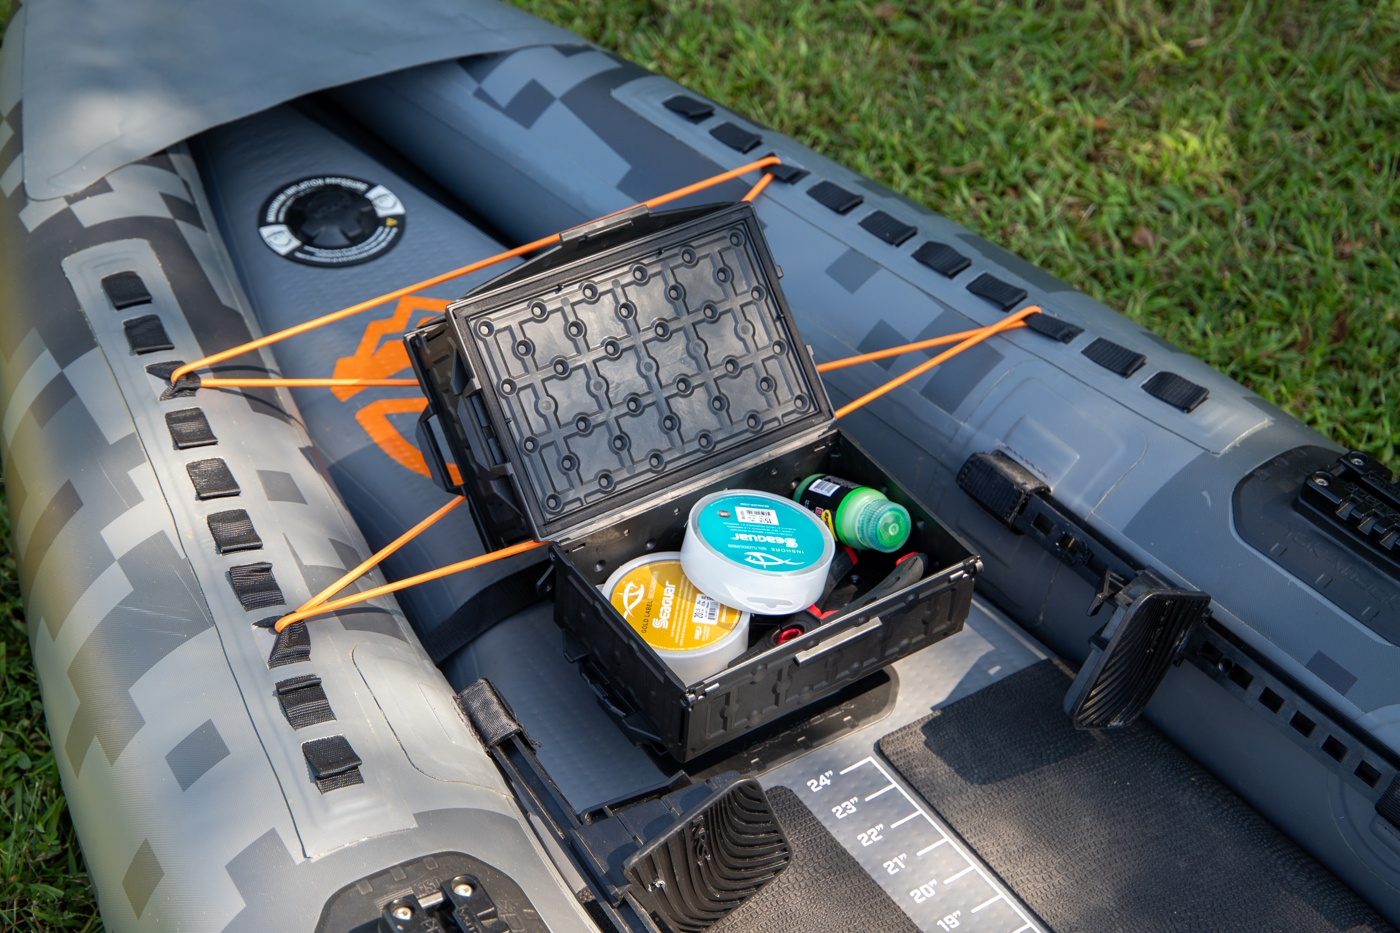 Accessing the bottom storage box is easy with the YakAttack tracpak storage box